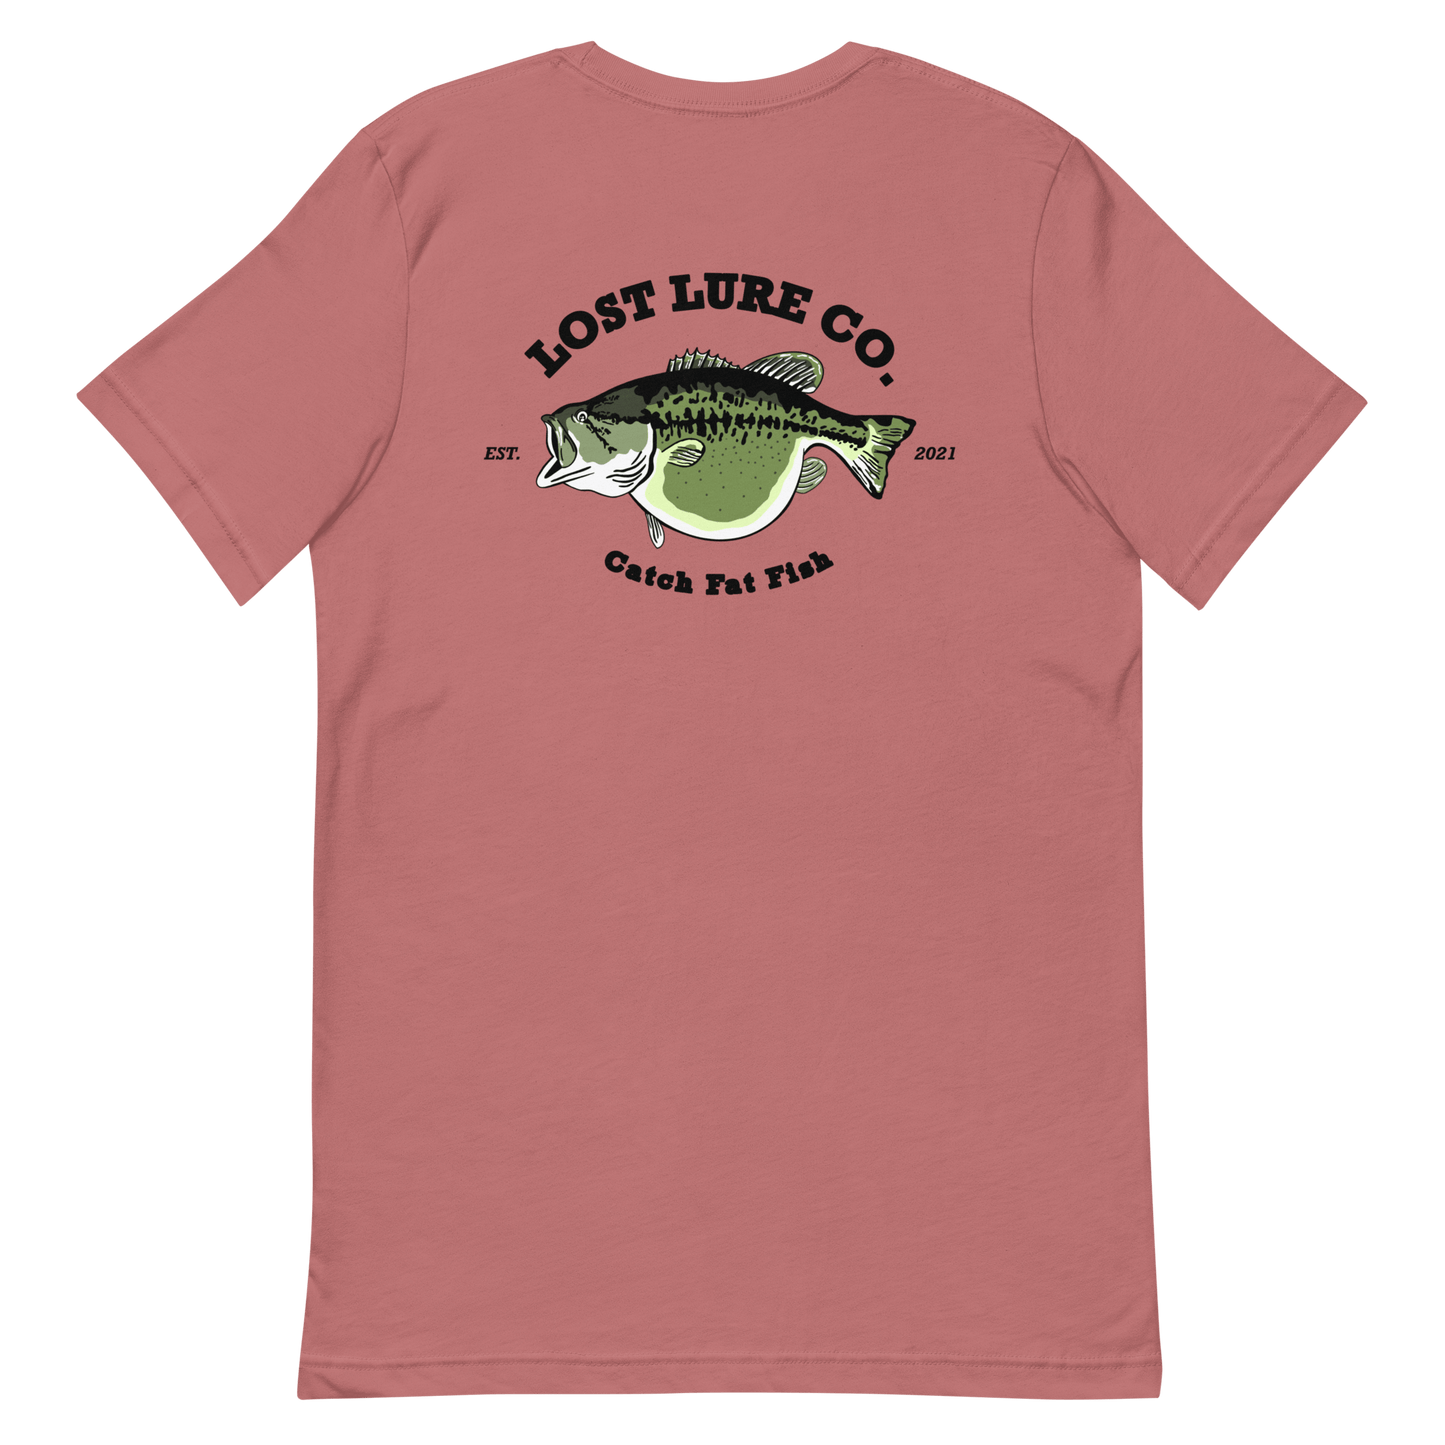 Bass fishing shirt. It has a drawing of a fat bass and it reads “lost lure co, catch fat fish”. The bass design is on the back, the lost lure logo is on the front. Mauve shirt, back side 